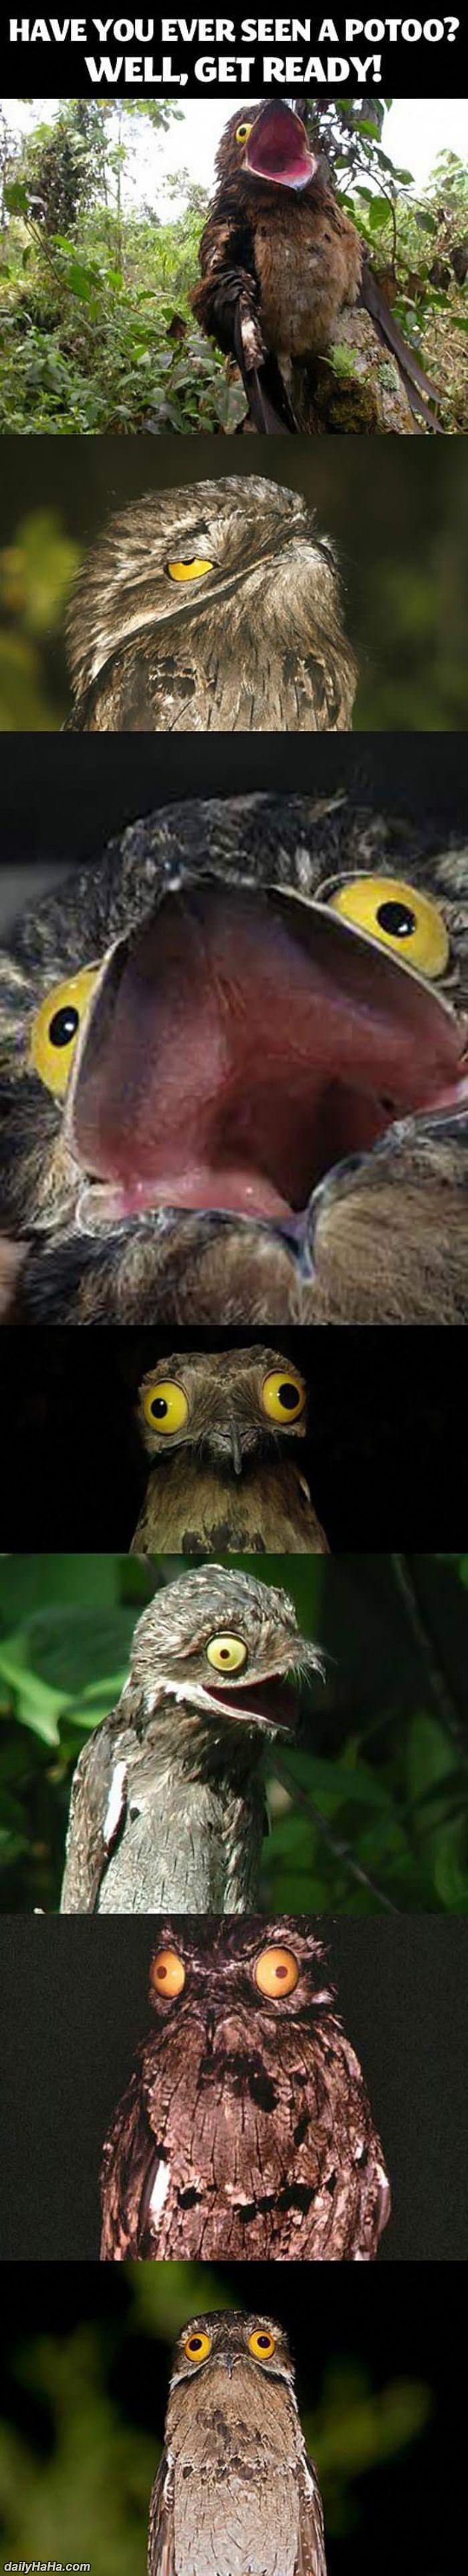 potoo funny picture